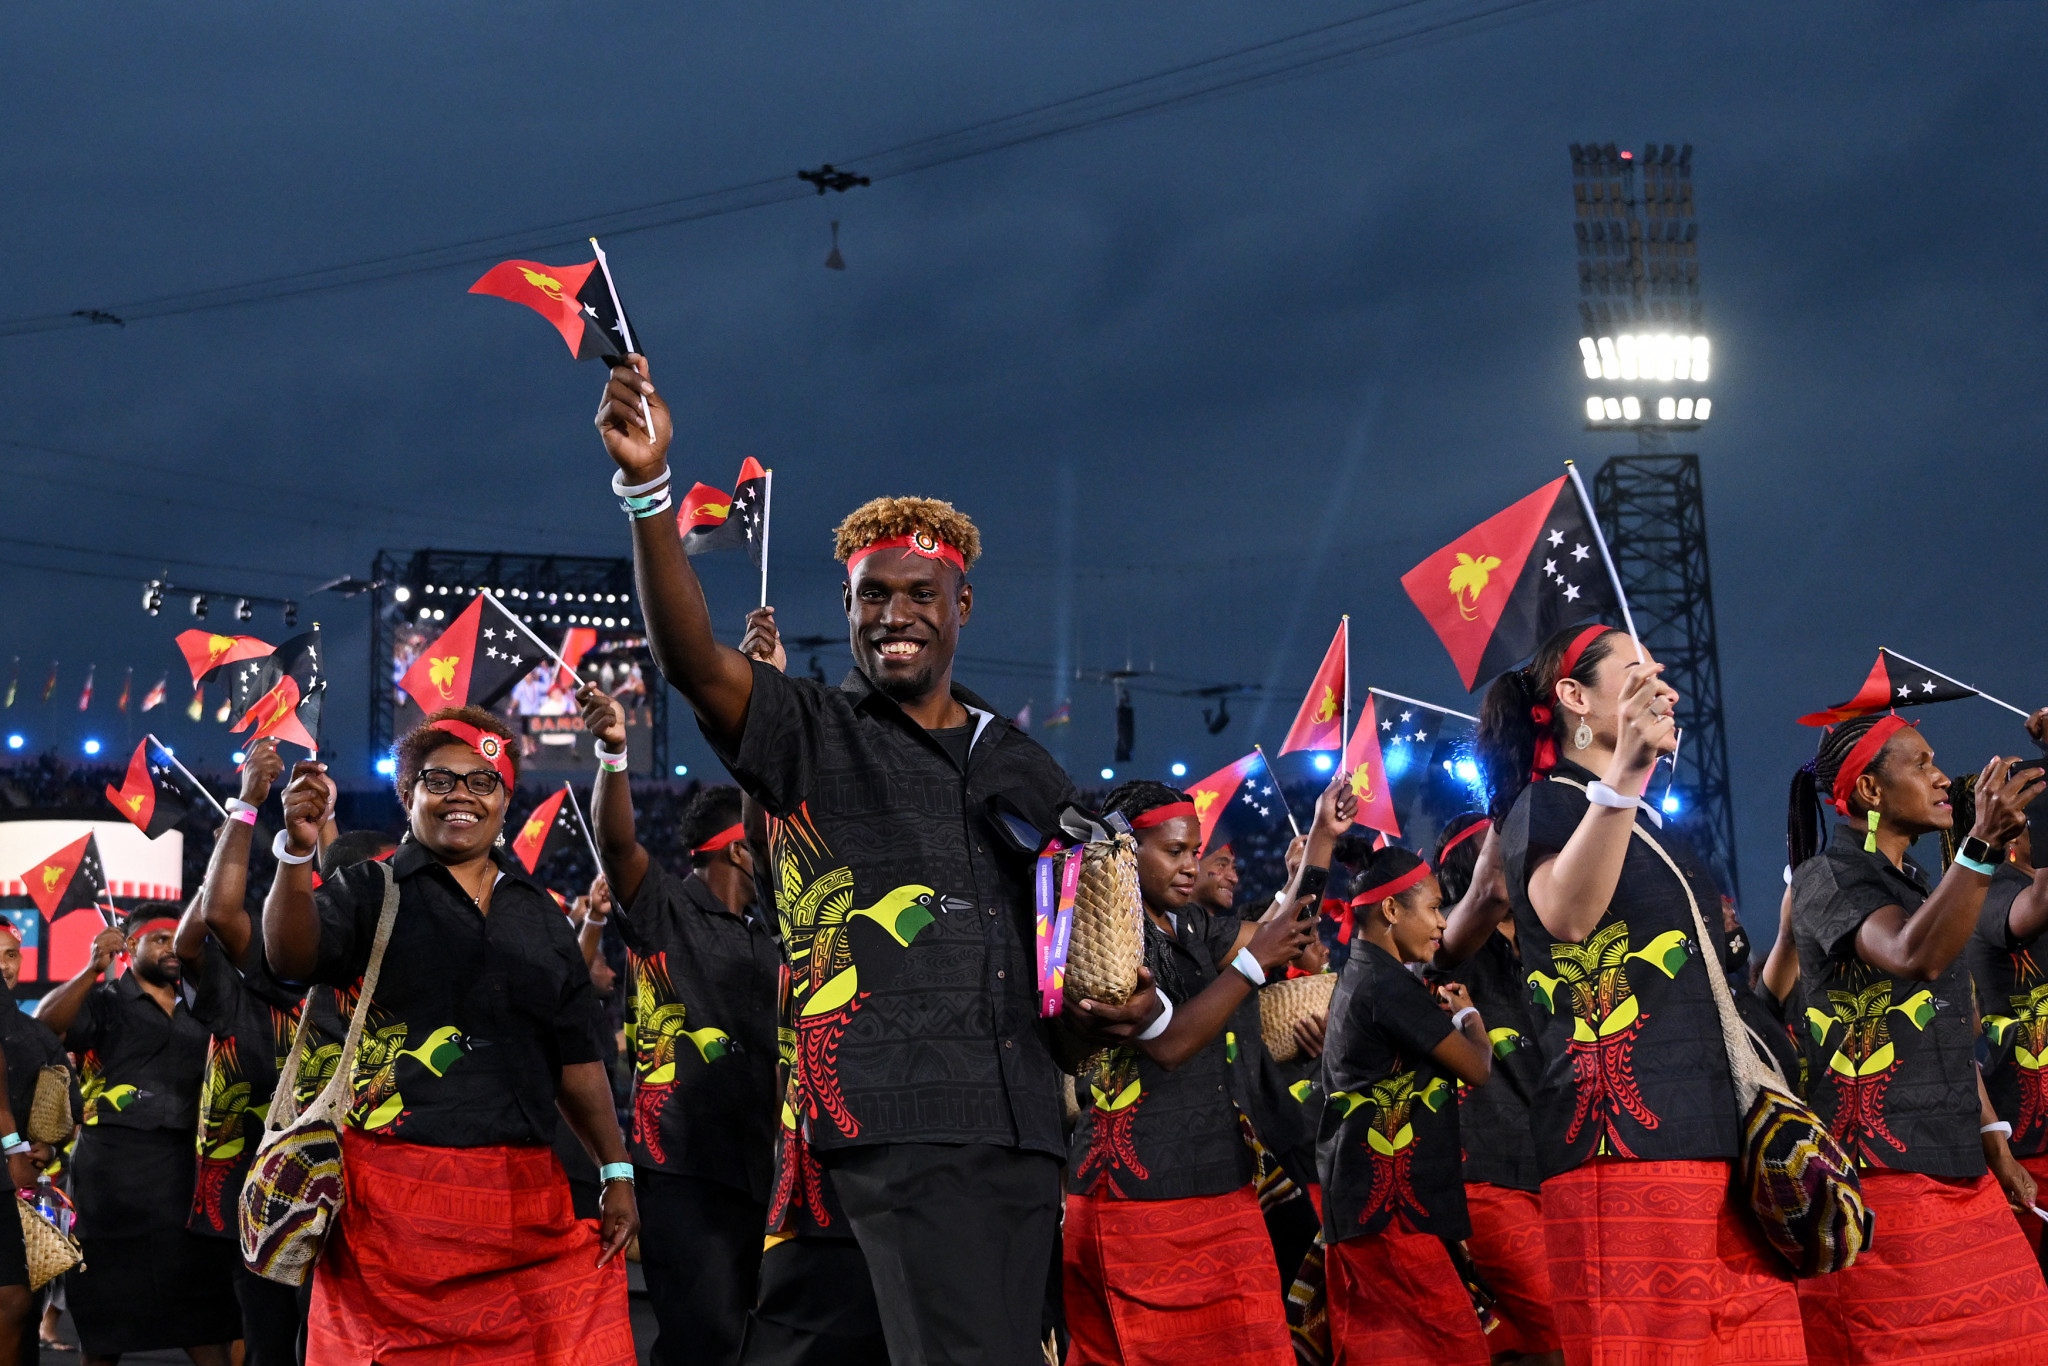 Billboard lease set to benefit Papua New Guinea Olympic Committee